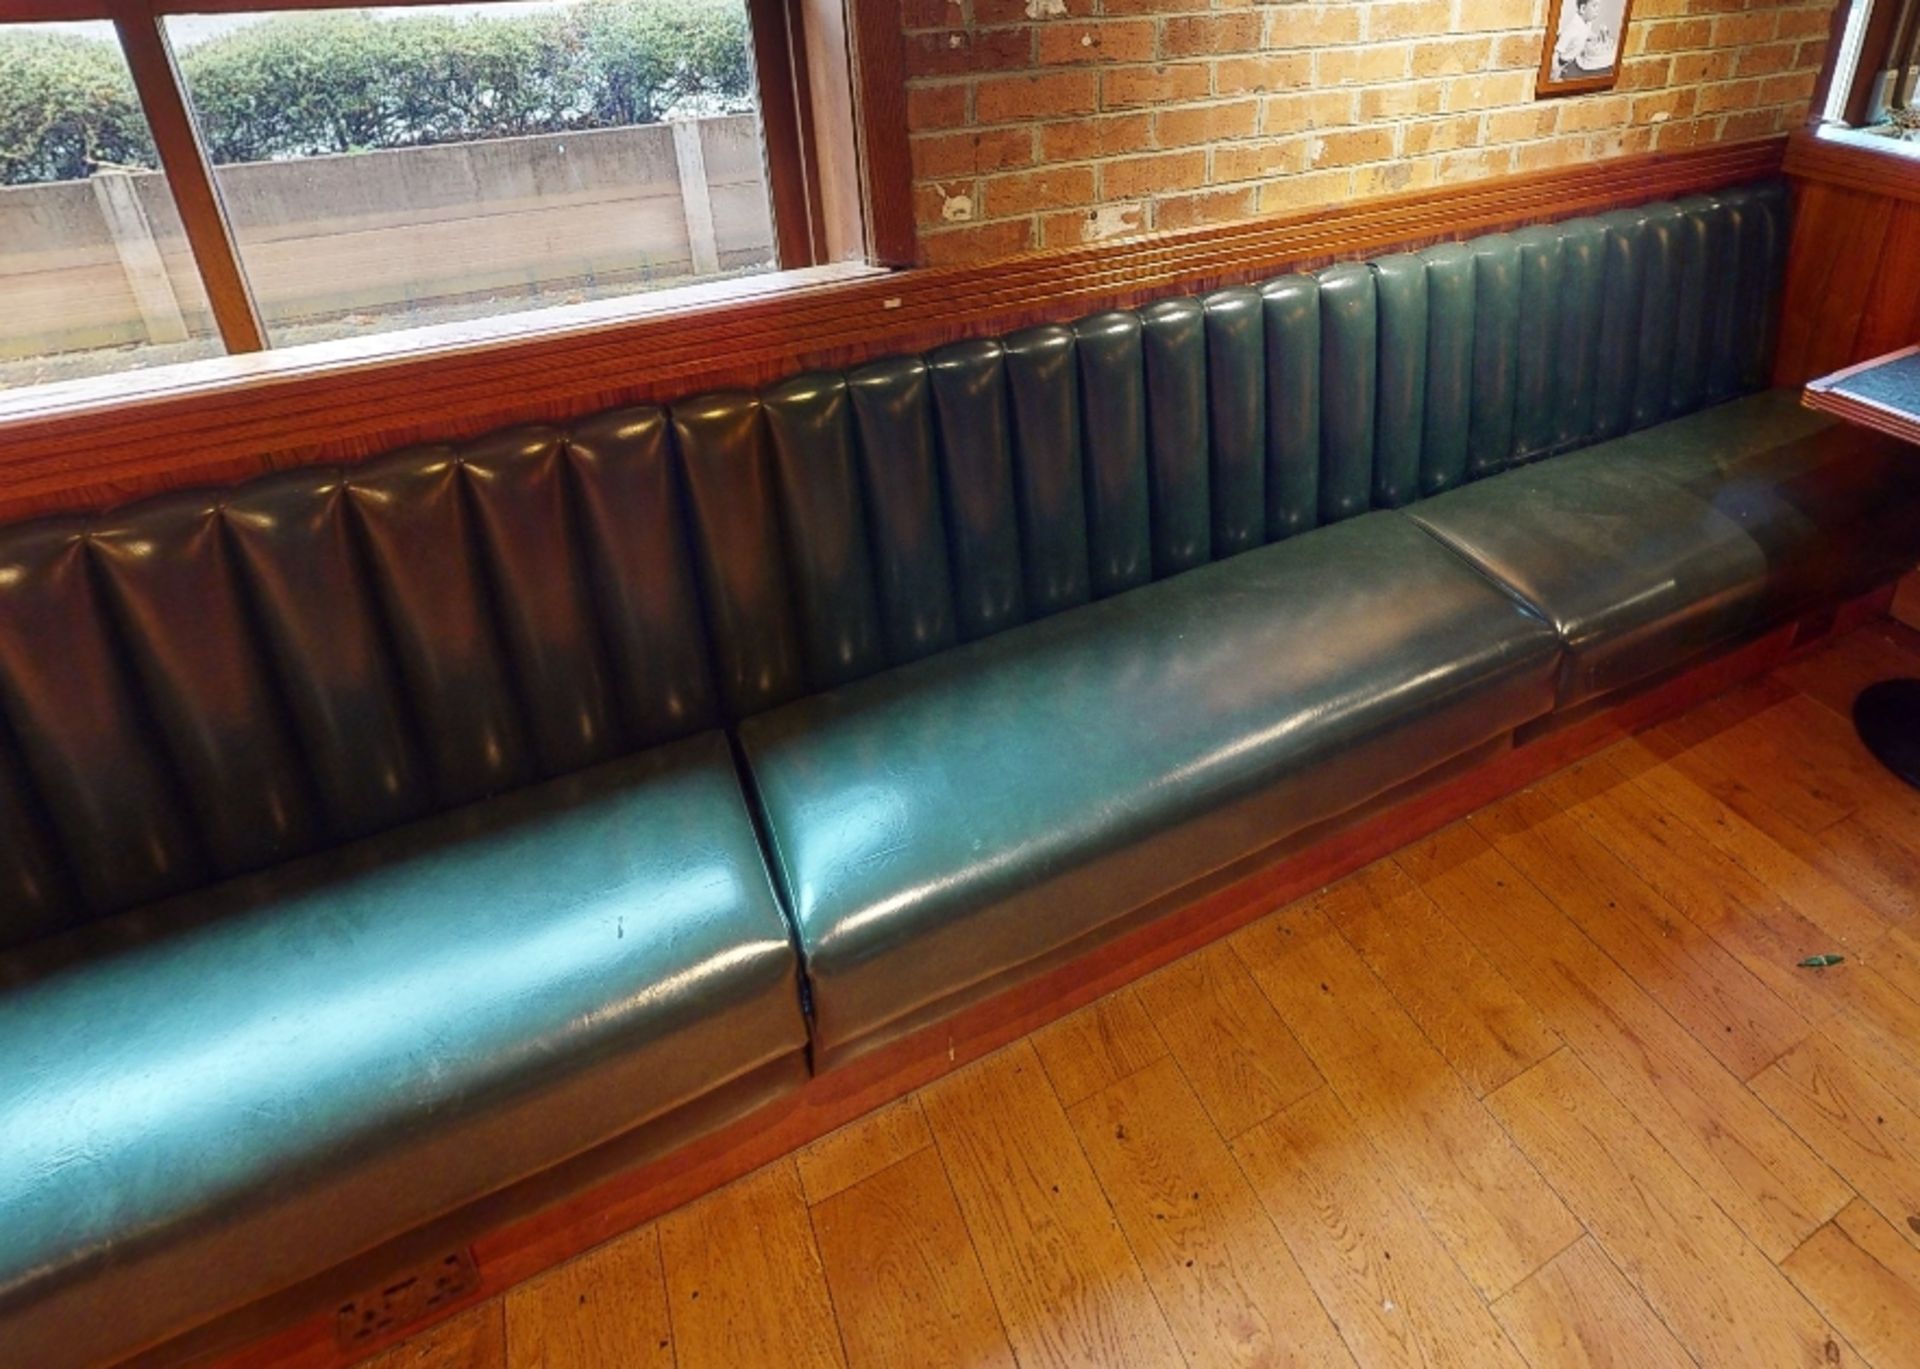 6 x Sections of Restarant Booth Seating Upholstered In Green Faux Leather With Vertical Fluted Backs - Image 6 of 6